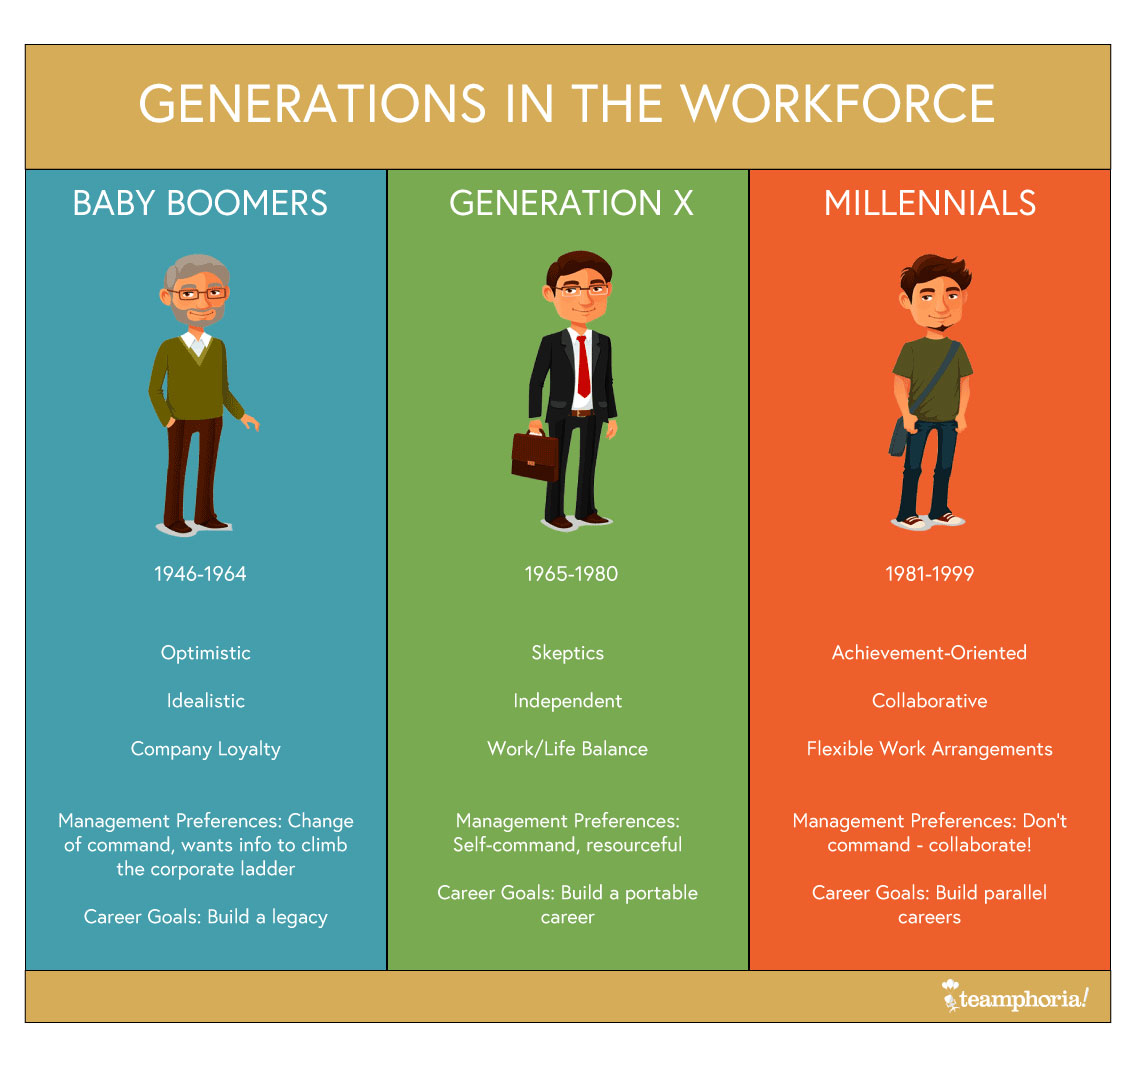 Clash of the Generations: How to Manage Different Generations in